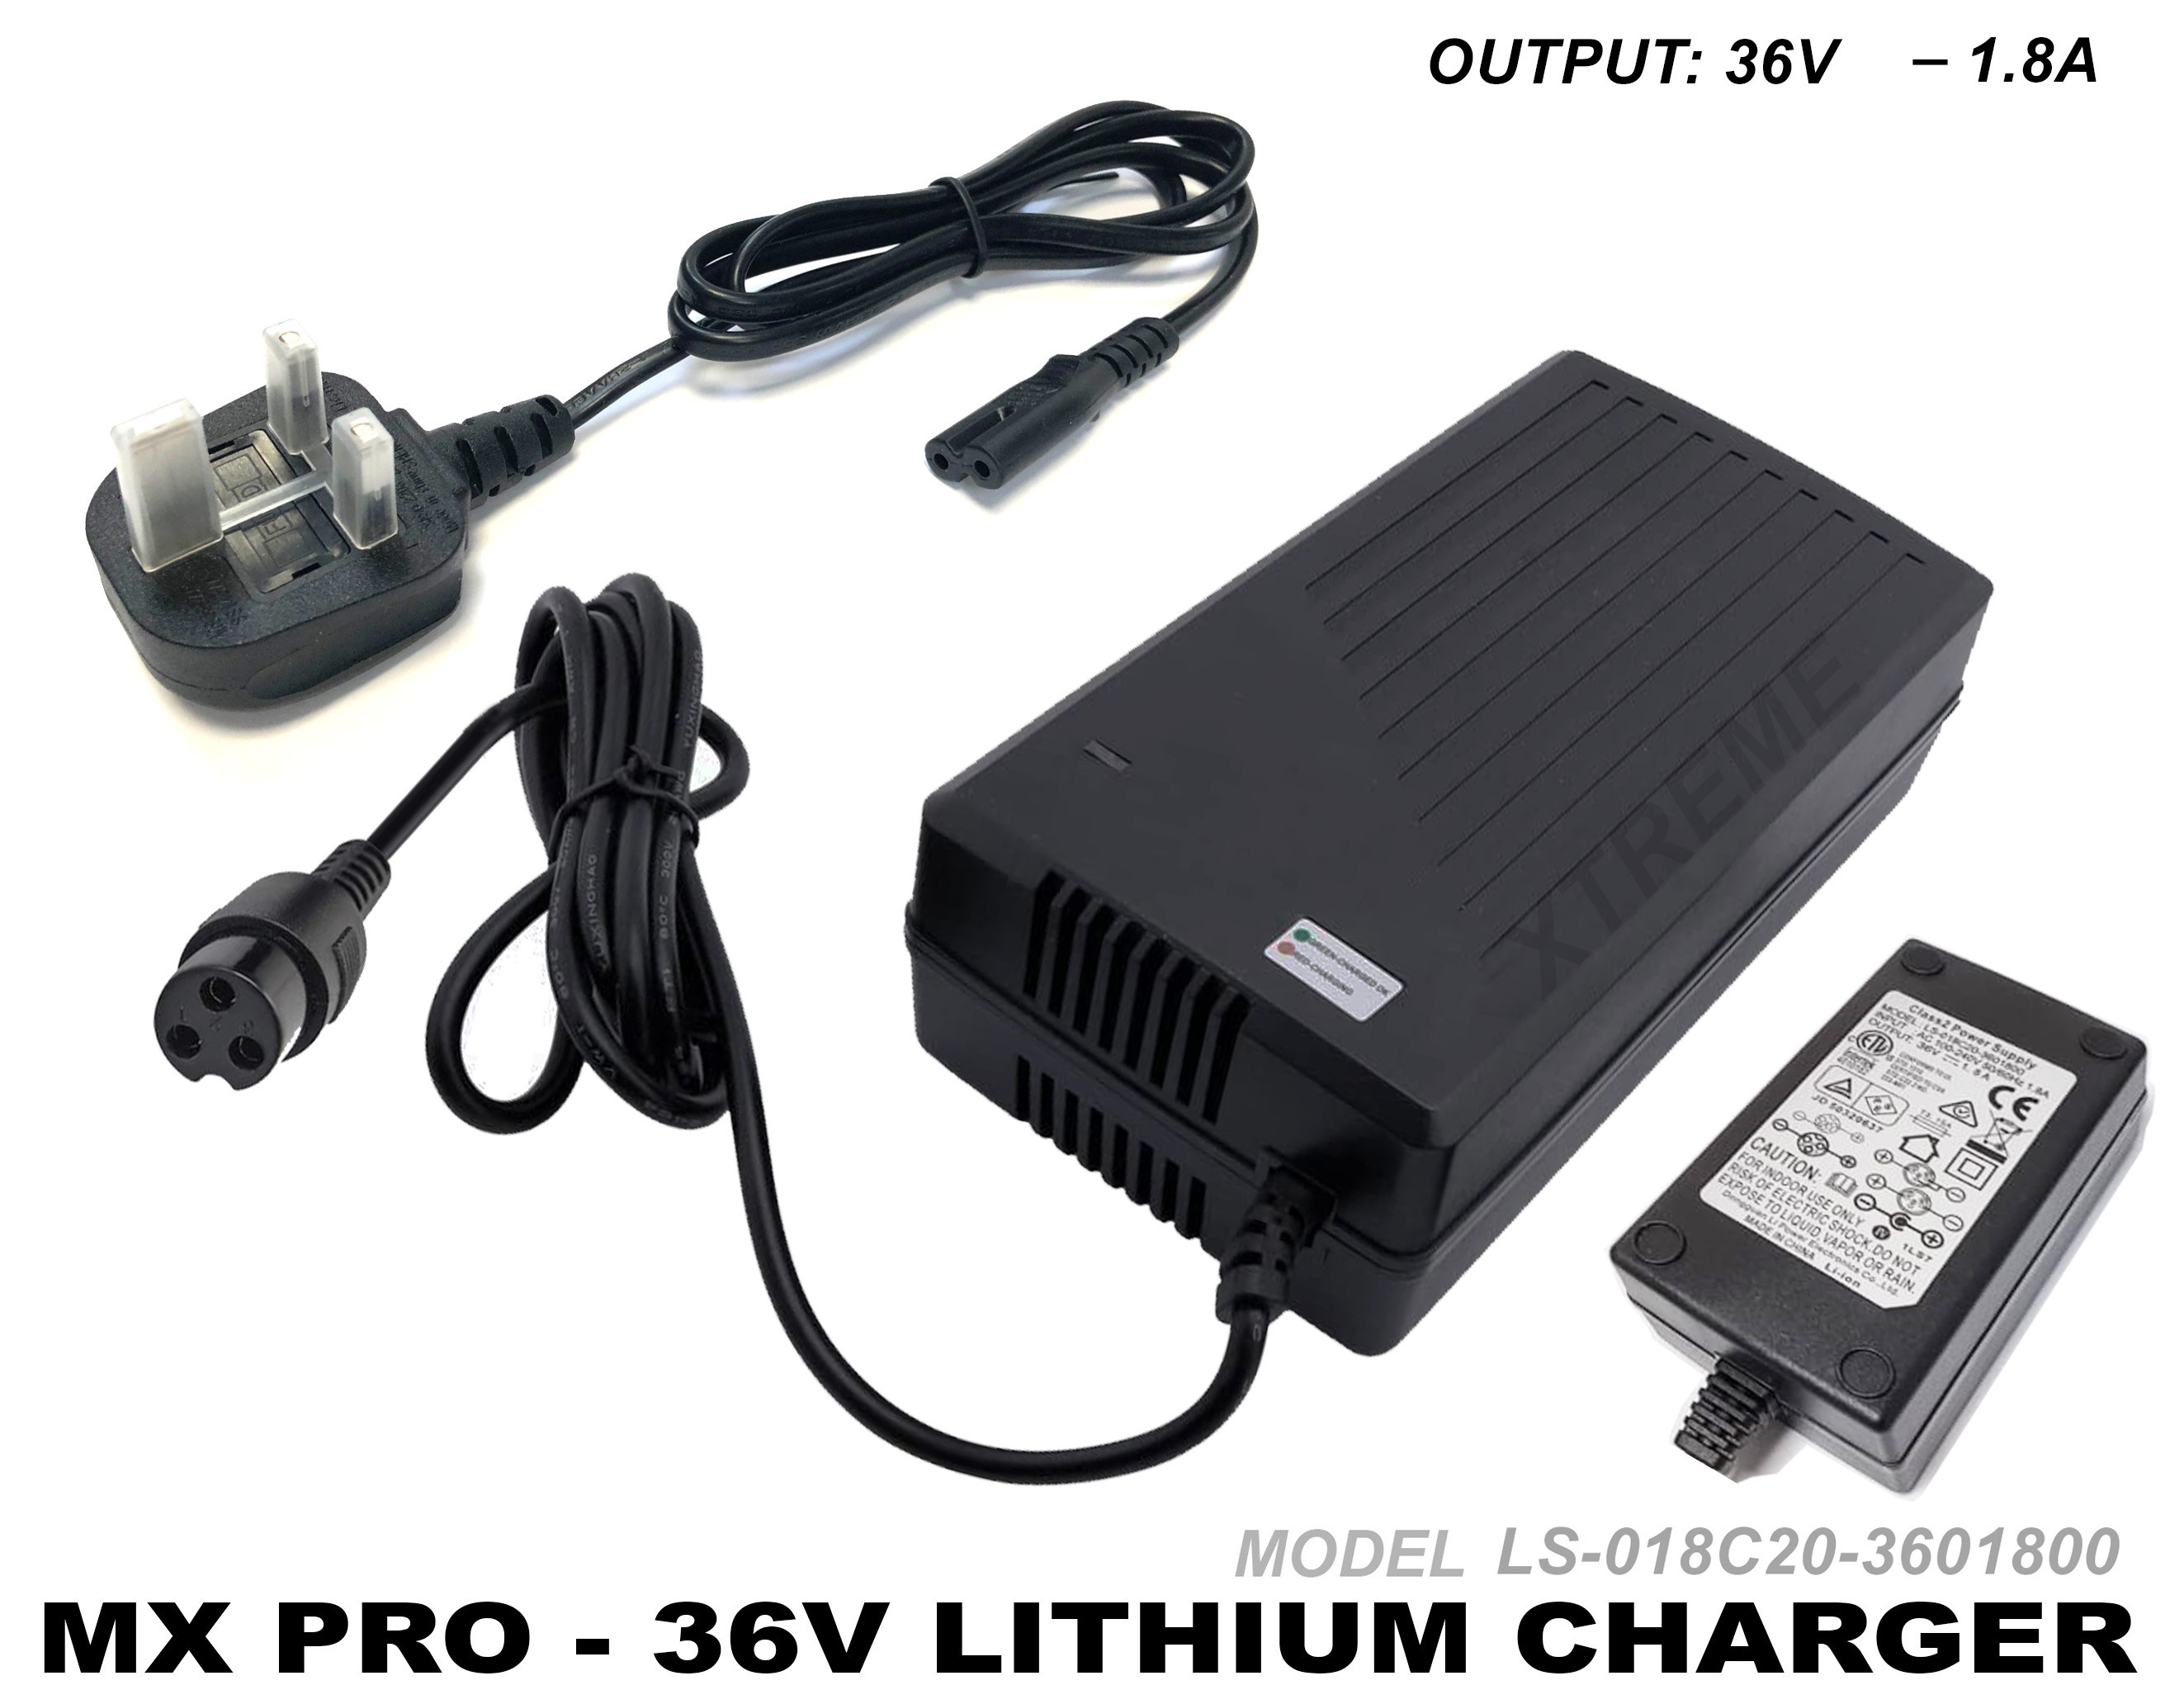 XTREME ELECTRIC XTM MX-PRO 36V 1100W LITHIUM BATTERY CHARGER